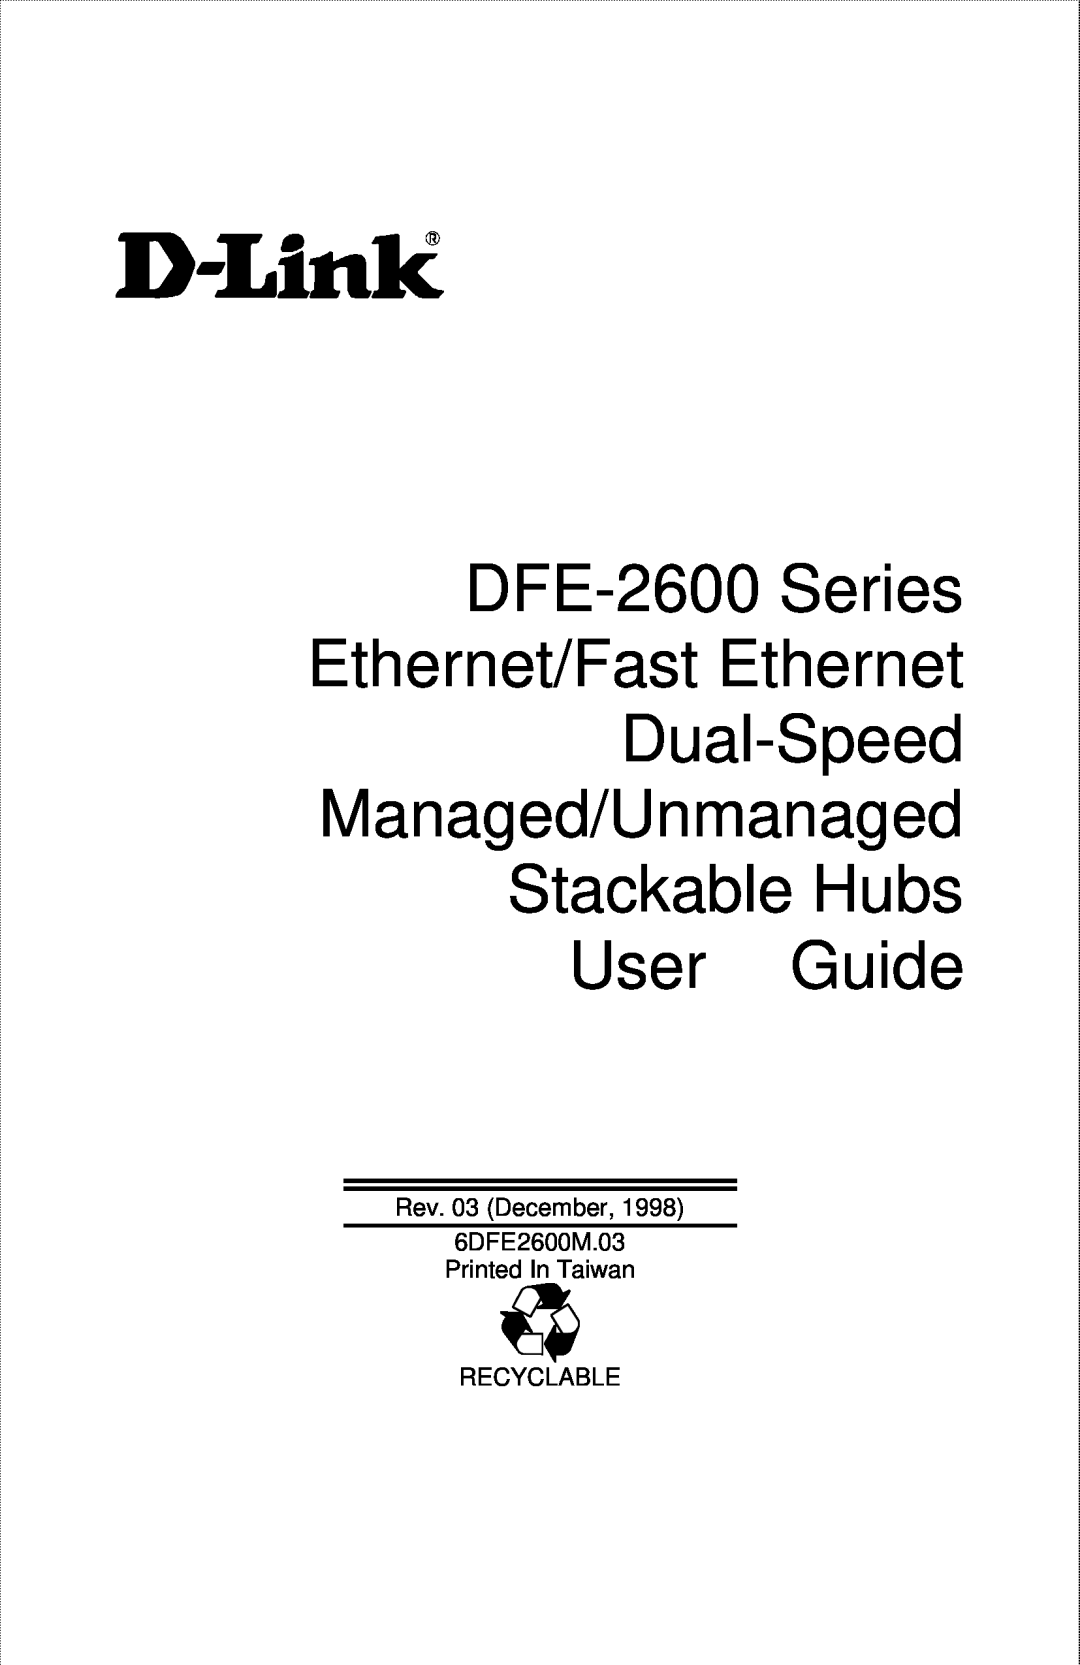 D-Link manual DFE-2600 Series Ethernet/Fast Ethernet Dual-Speed Managed/Unmanaged, Stackable Hubs User Guide 